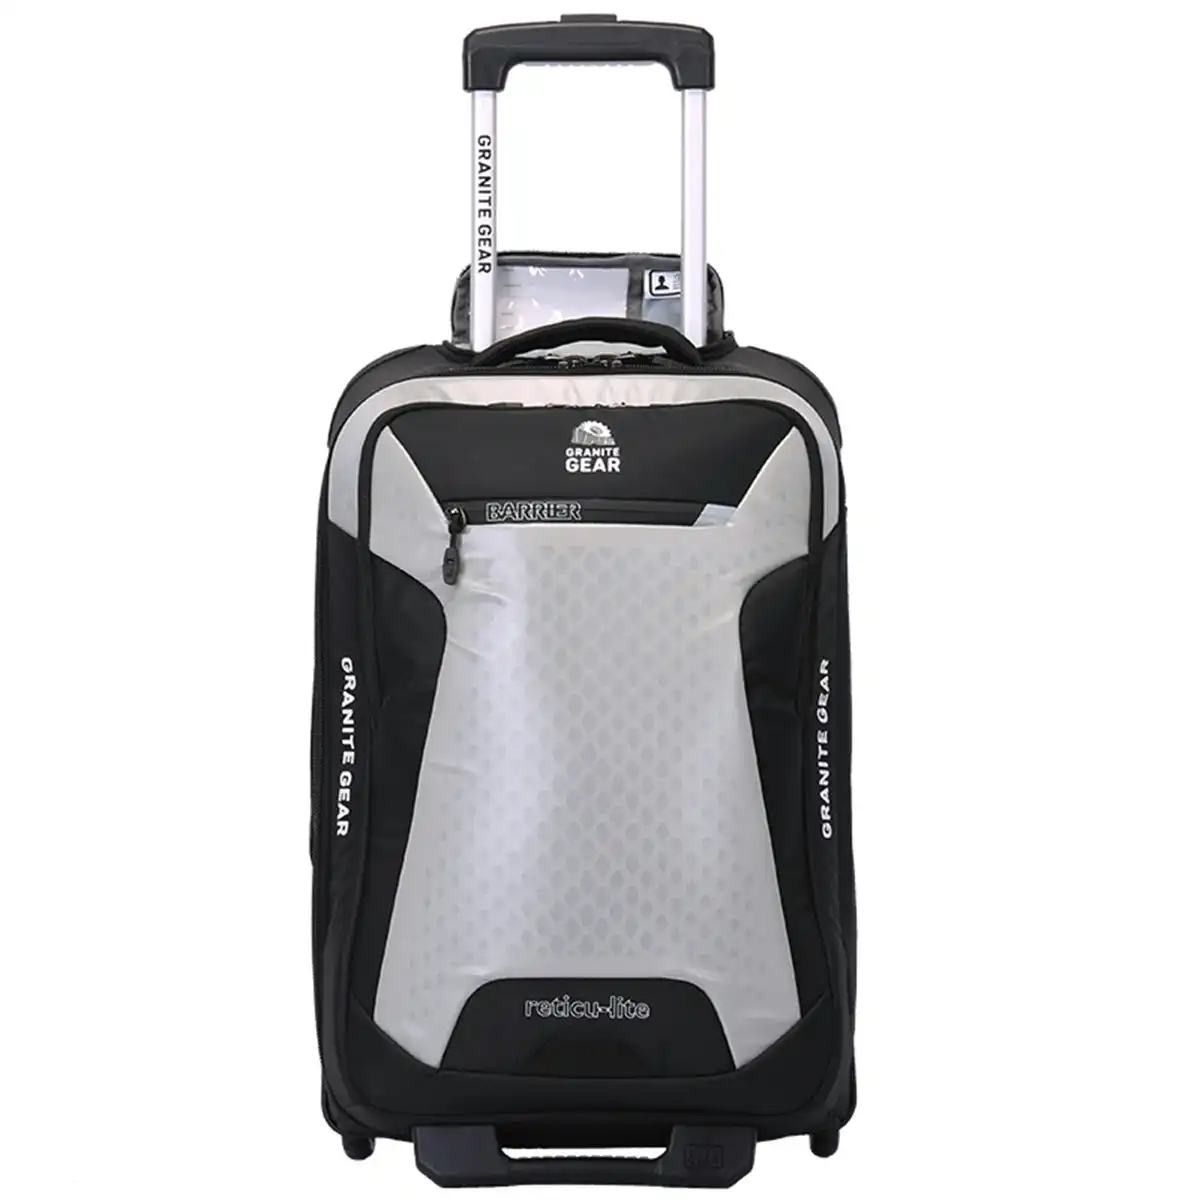 Granite Gear Luggage Wheeled Duffle Bag Lightweight With Wheel SofeCase Carry On Travel Suitcase G3022-0001